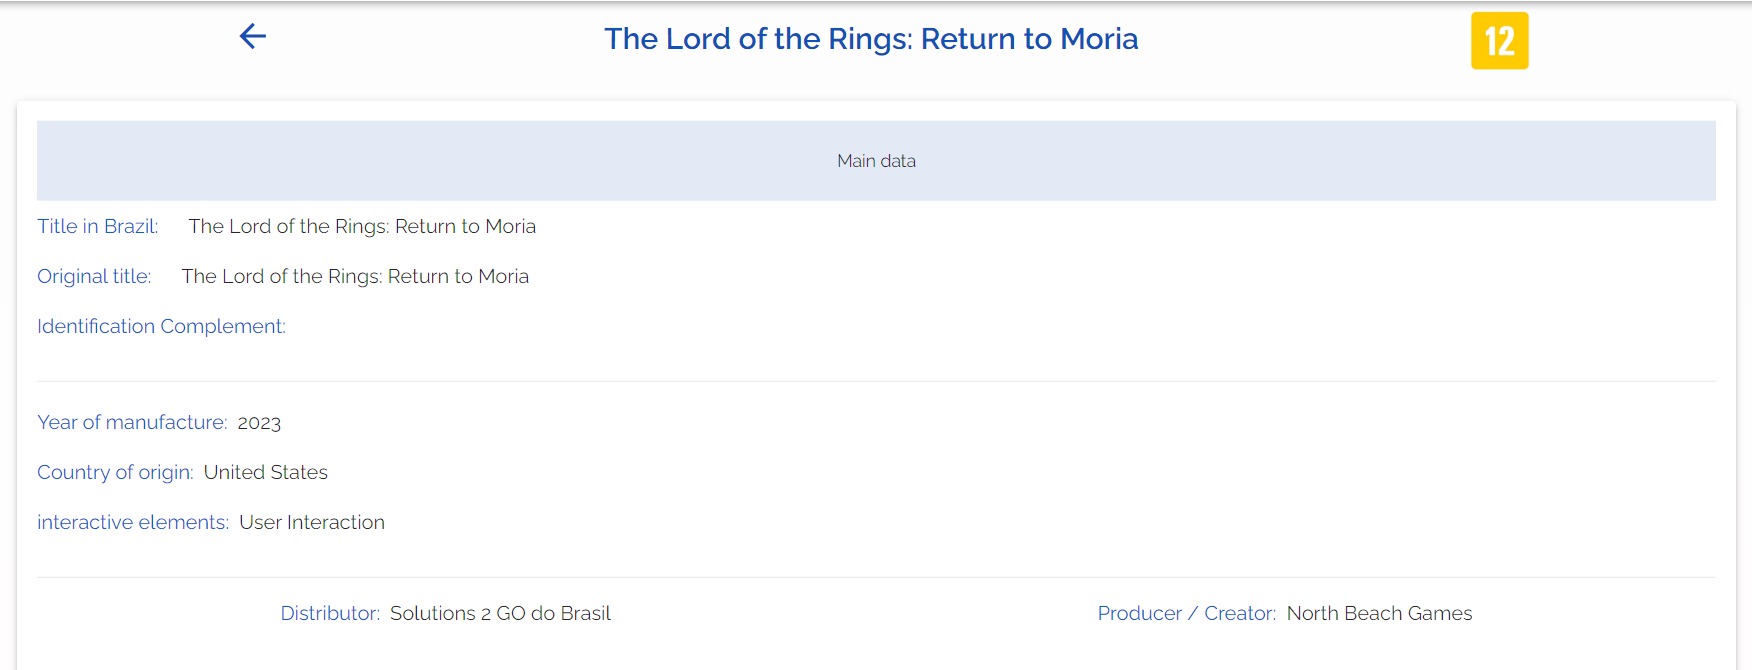 The Lord of the Rings: Return To Moria has been rated on Nintendo Switch and PS4.